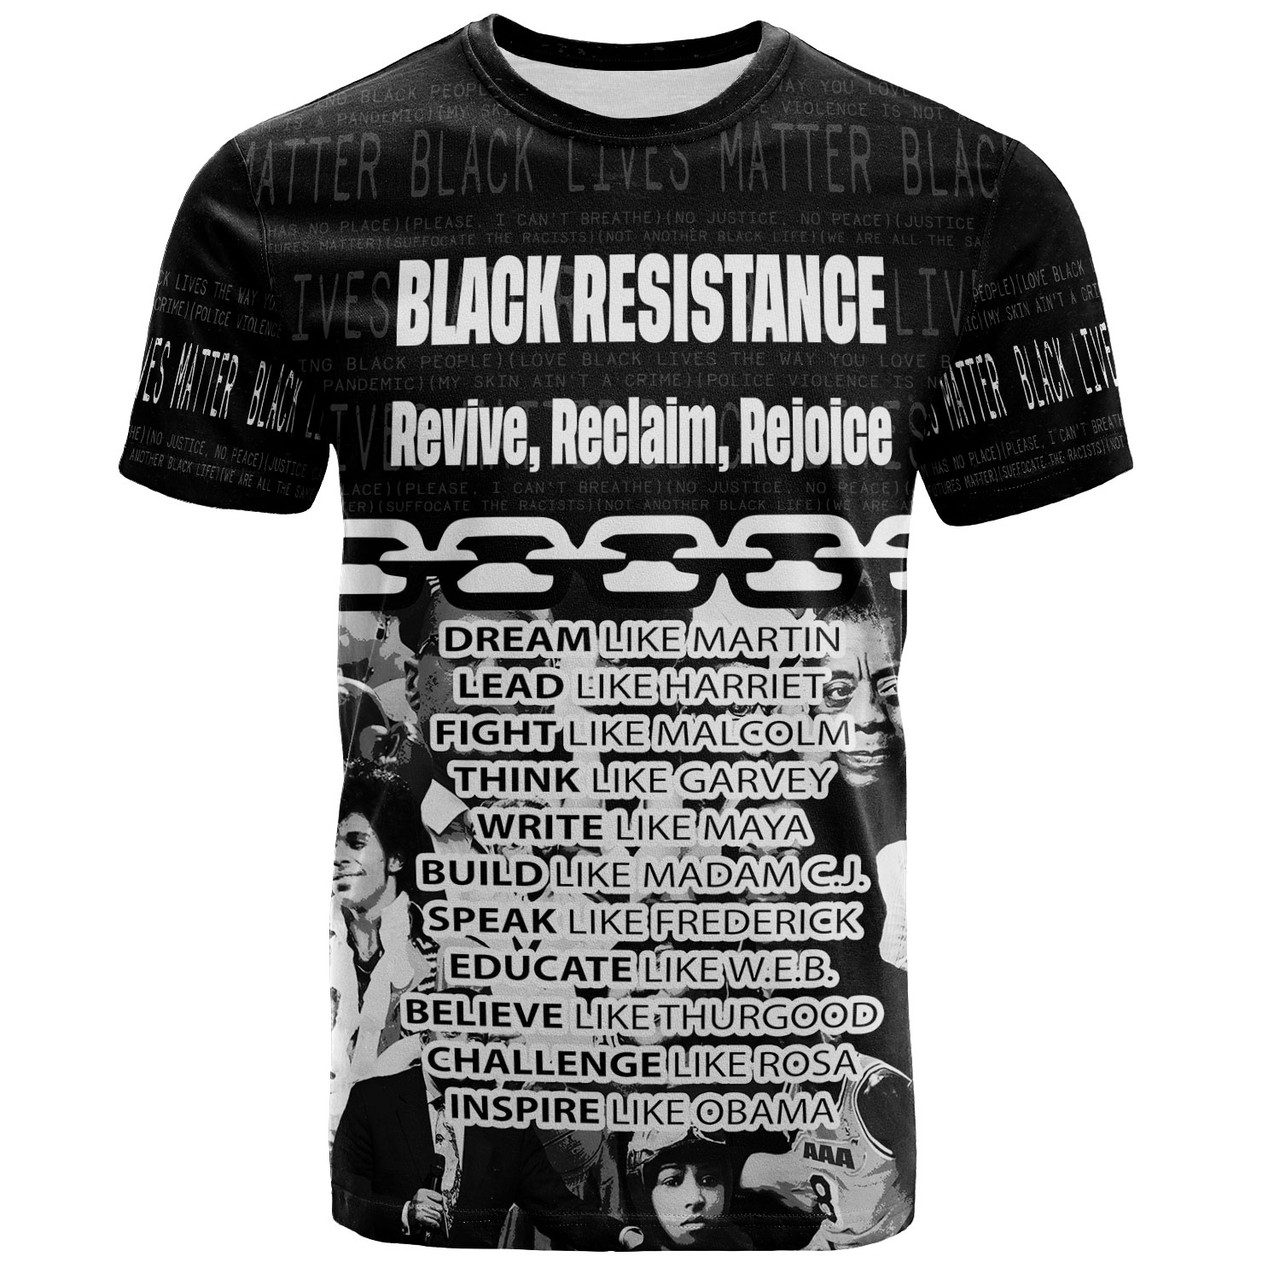 African Black History Month T-shirt – Custom Black Resistance African American Civil Rights Leaders T-shirt